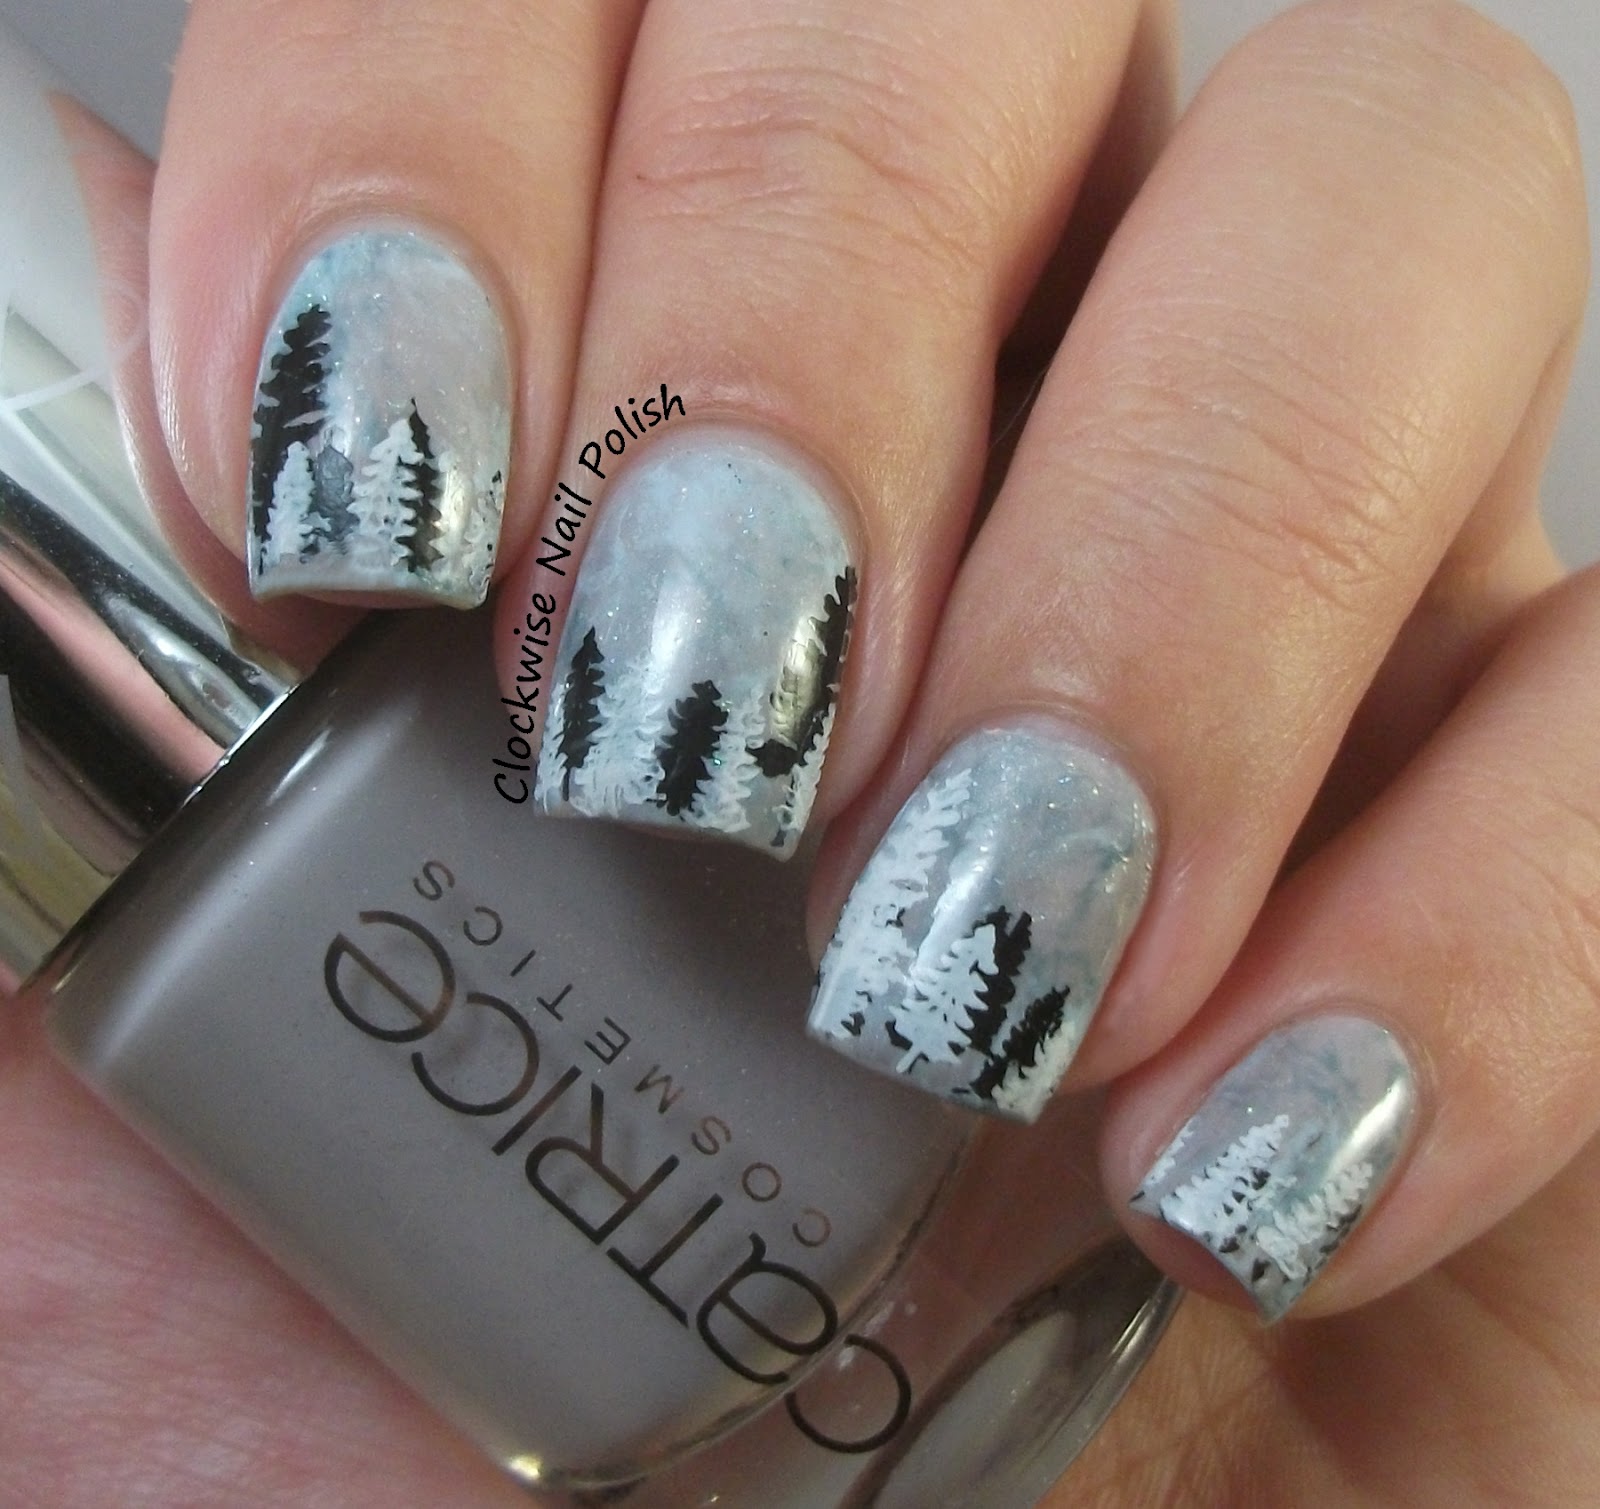 The Clockwise Nail Polish: DRK Seasons Stamping Plate Review